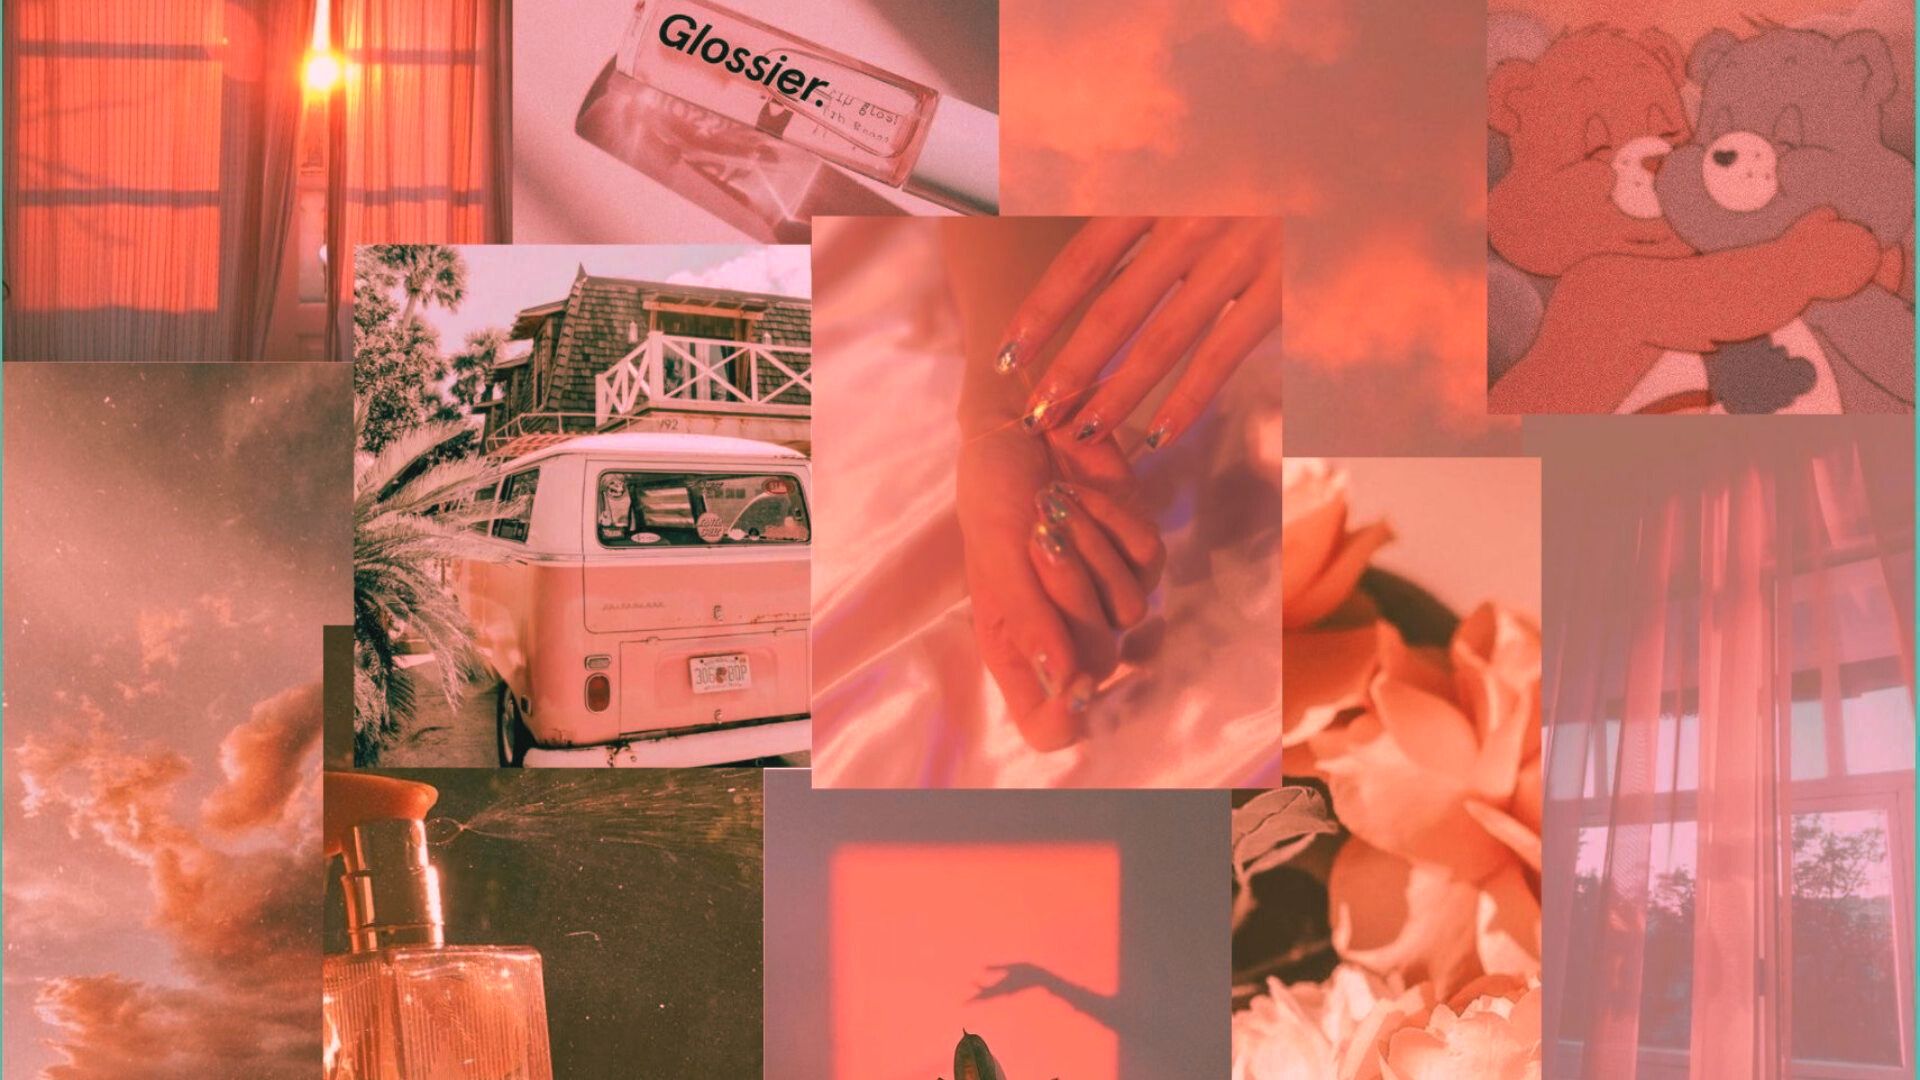 A collage of photos in a pink and orange aesthetic including a van, nail polish, and a teddy bear. - Desktop, 1920x1080